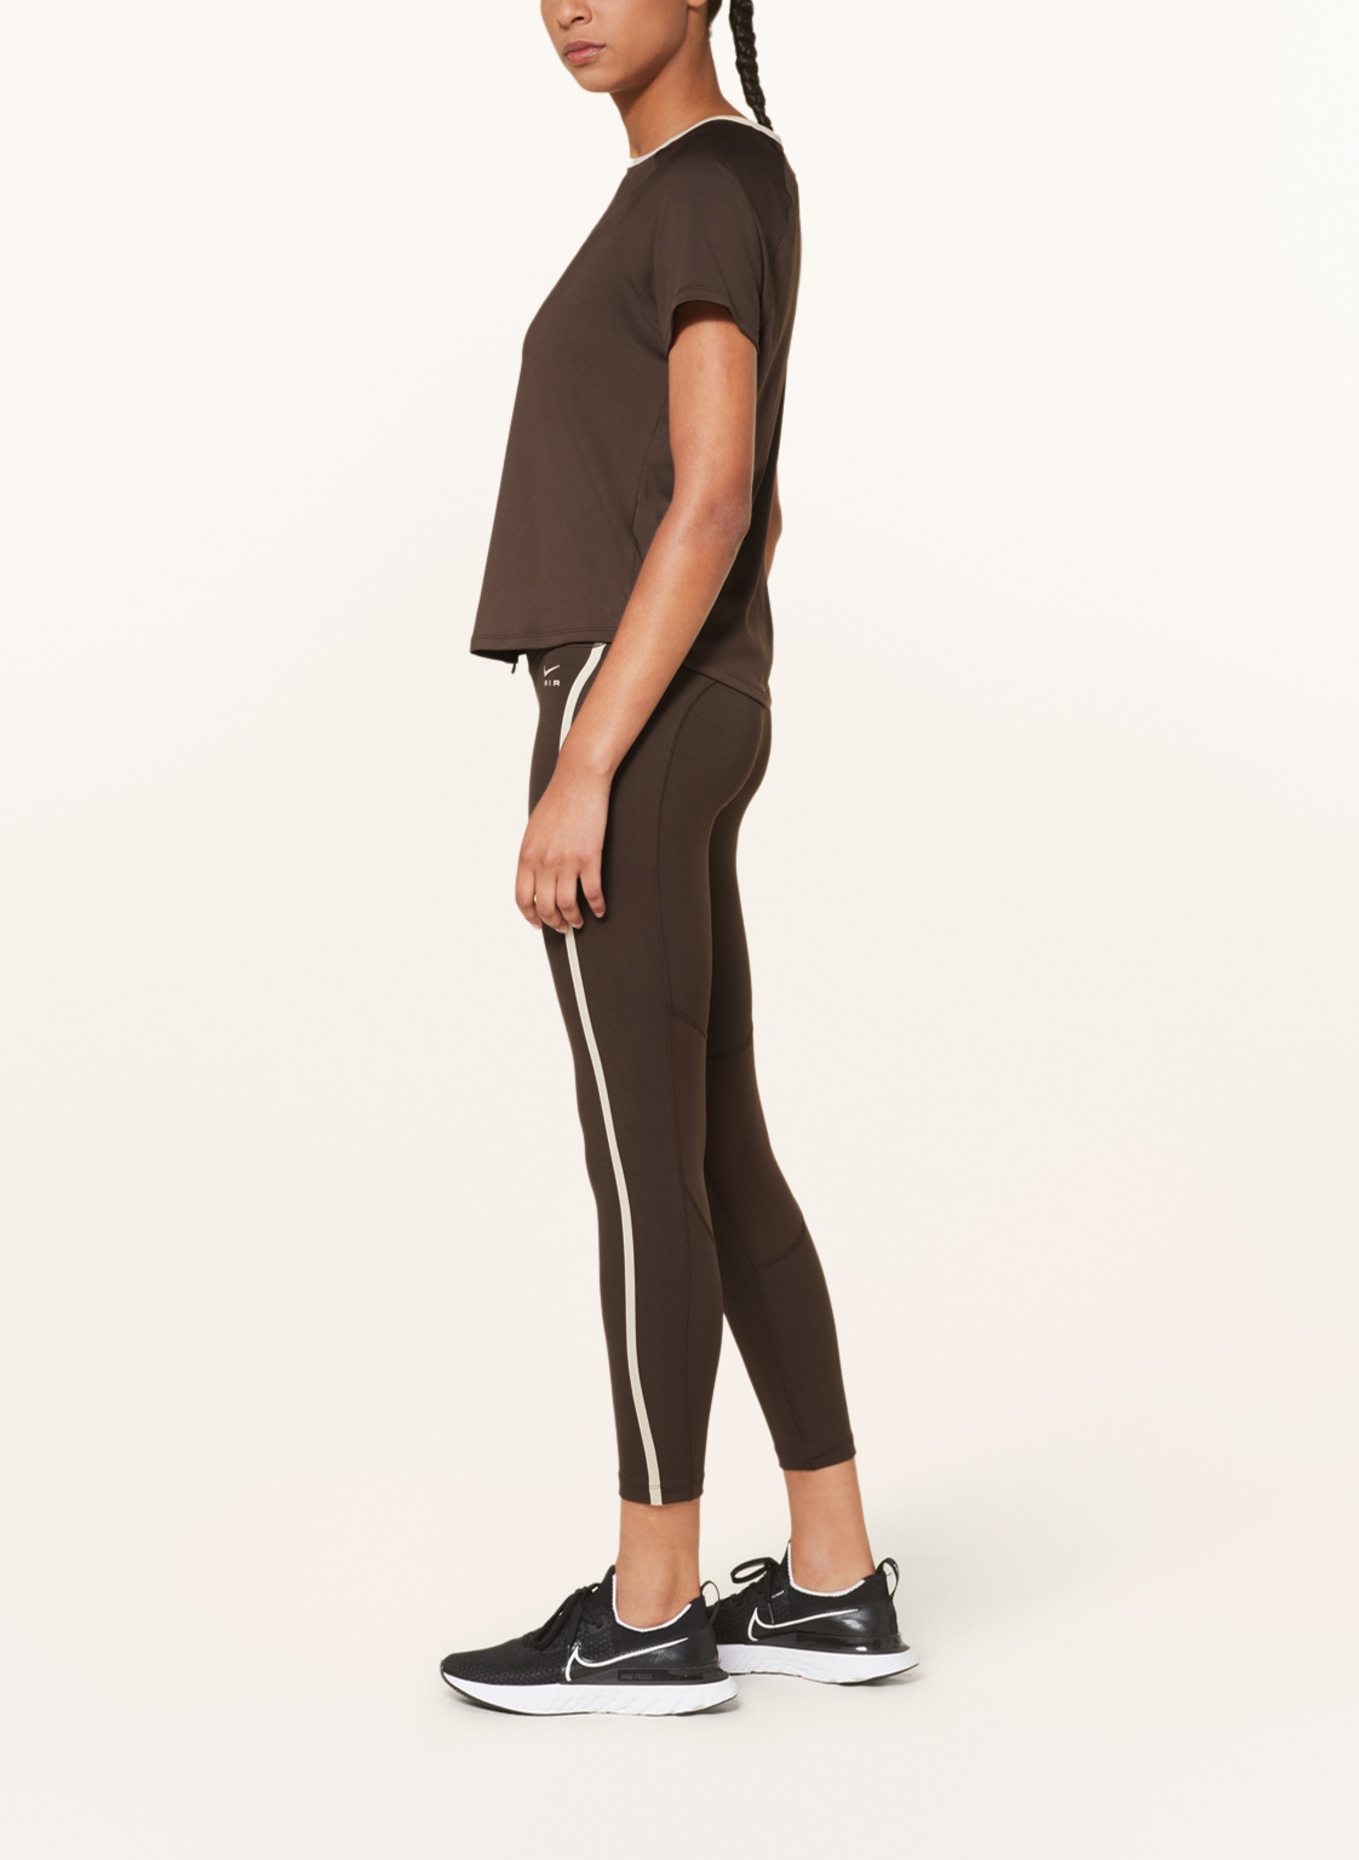 Nike Running tights FAST, Color: DARK BROWN/ LIGHT BROWN (Image 4)